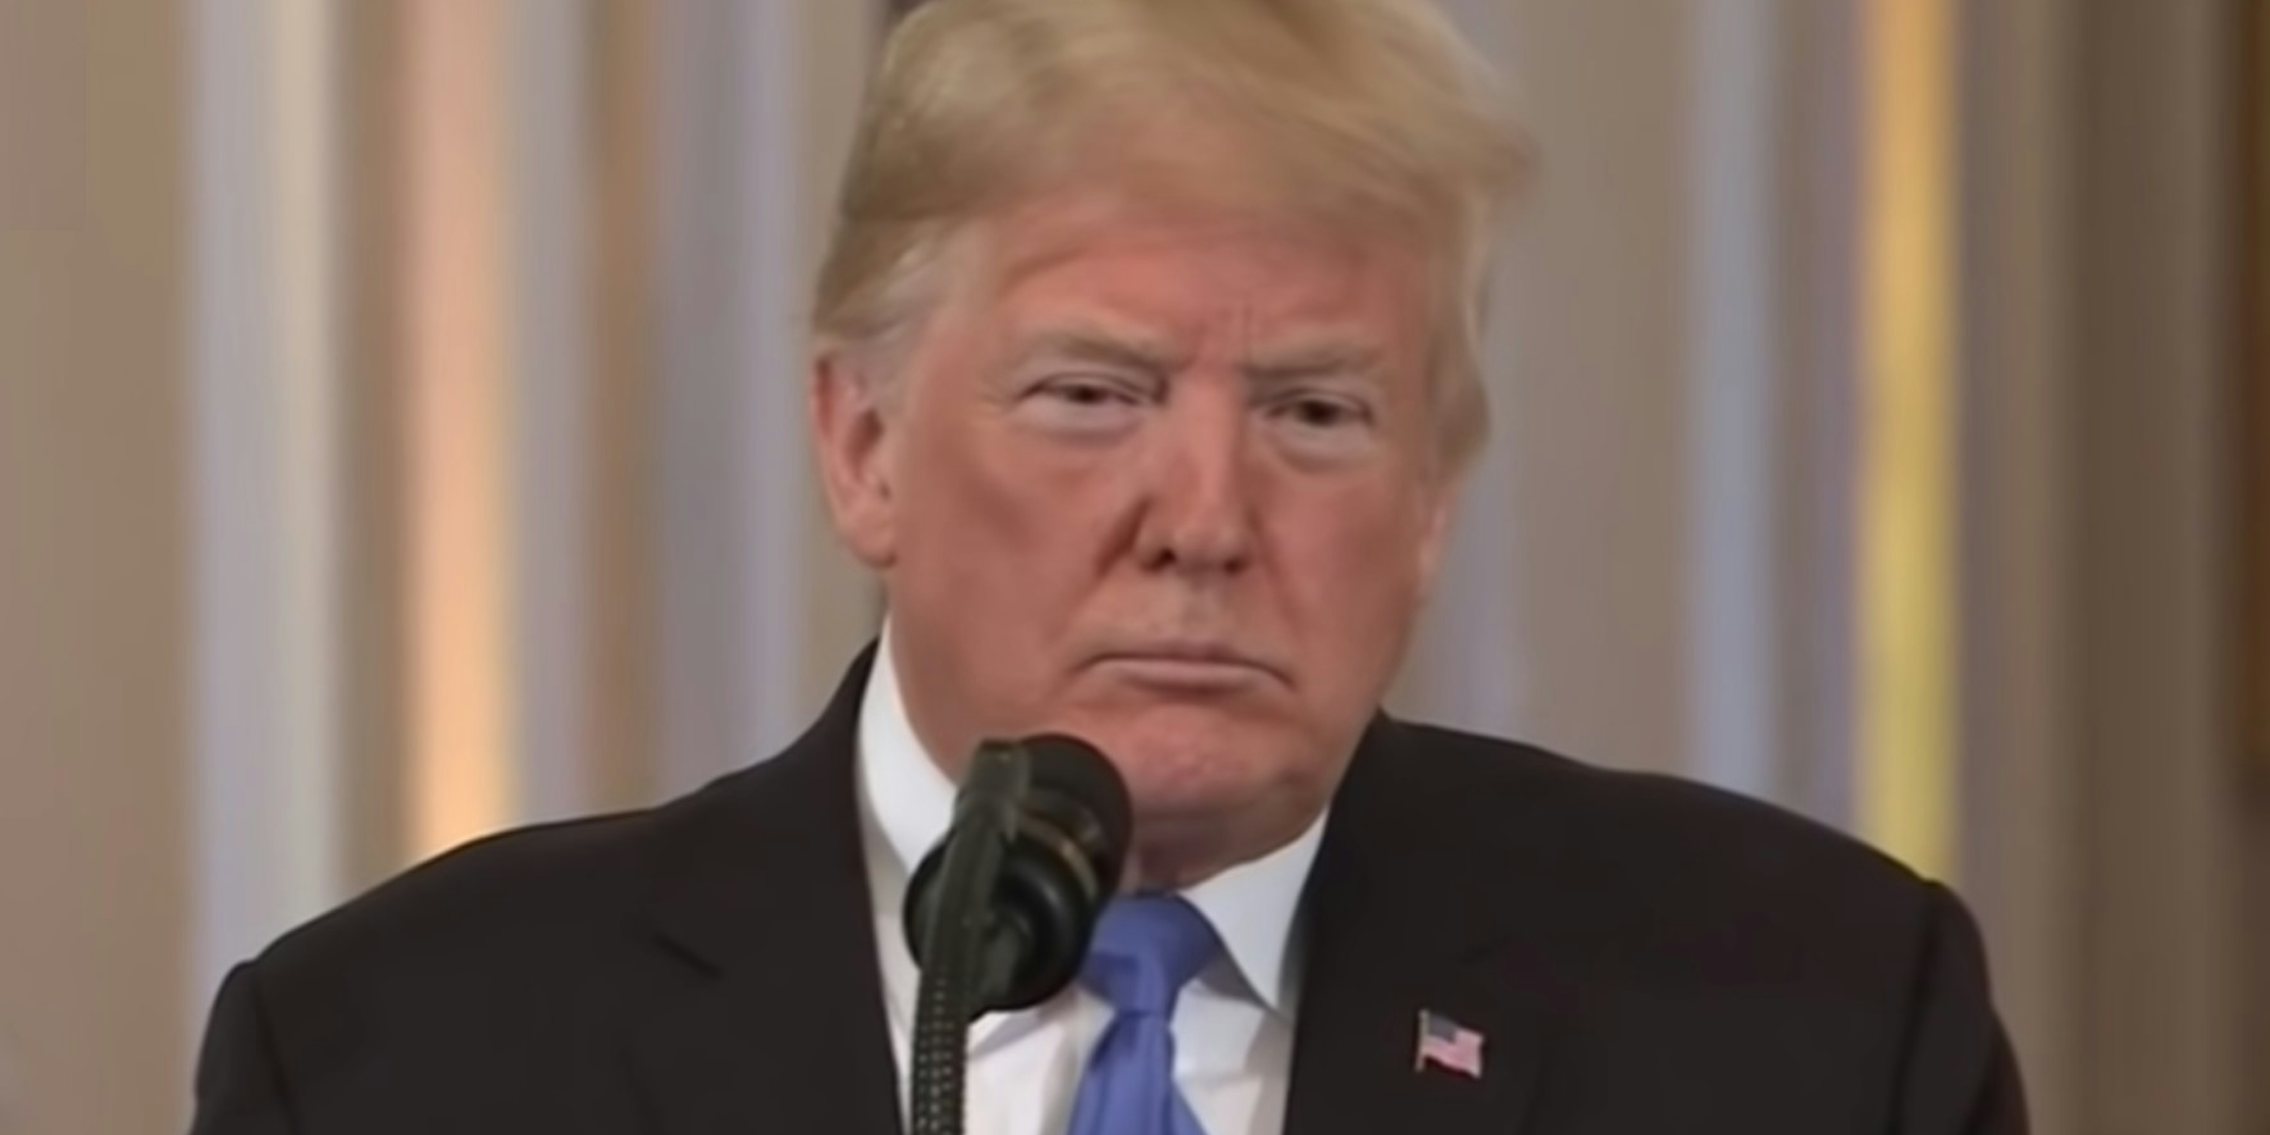 Donald Trump speaking at a press conference